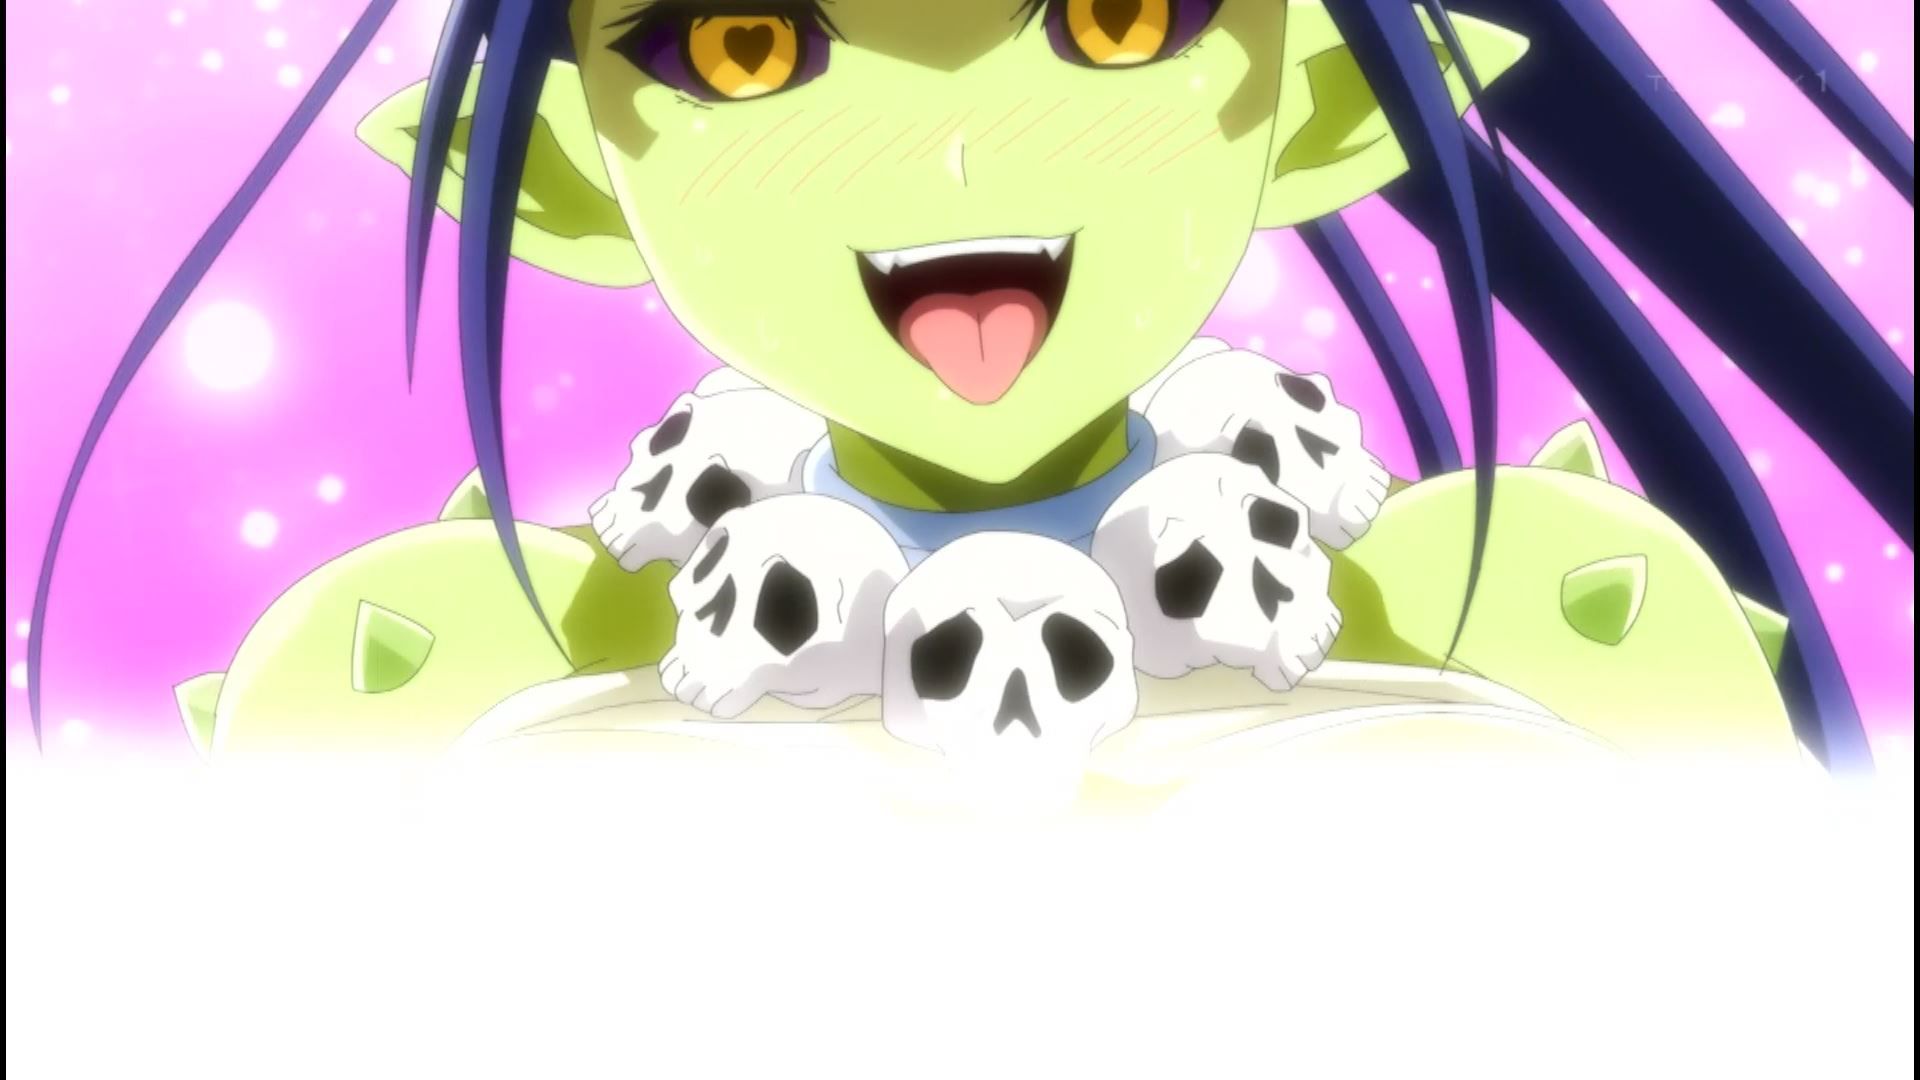 The goblin girl and ecchi scene that got estrus in episode 2 of the second season of the anime "Peter Grill and the Time of the Wise"! 17